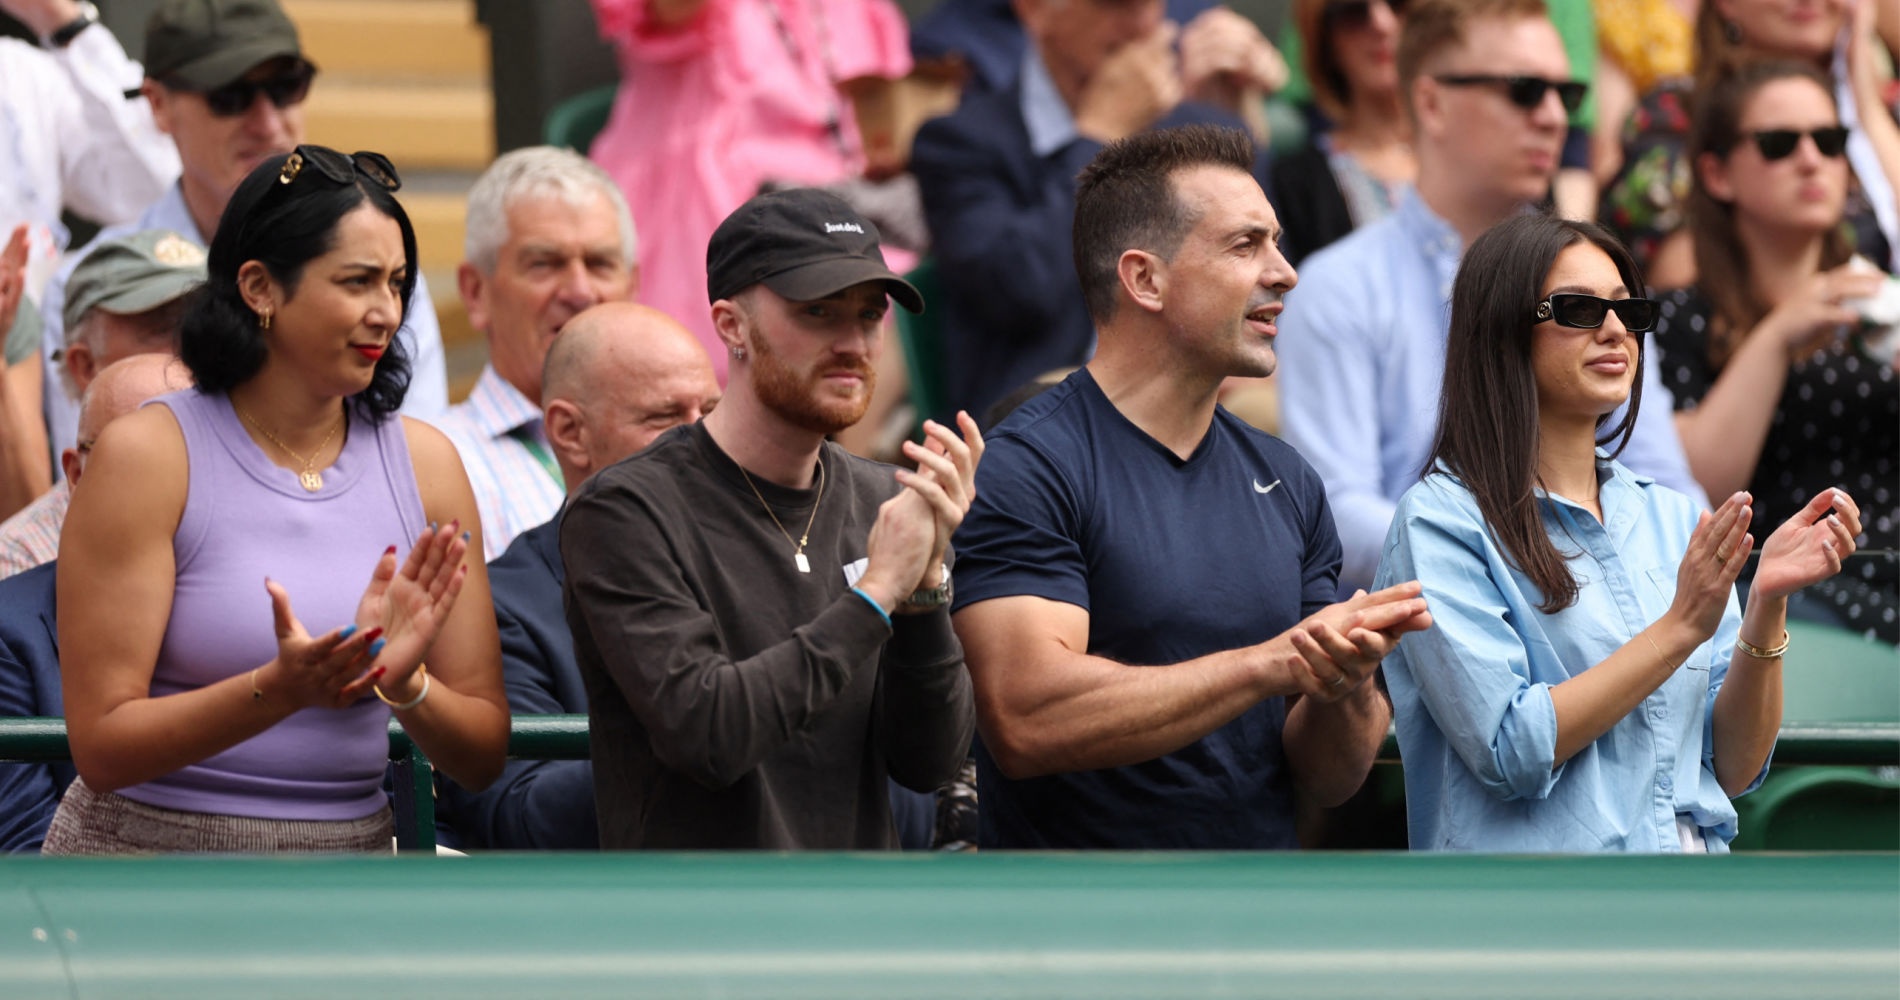 The support team of Nick Kyrgios cheers him during his quarter-final match at 2022 Wimbledon